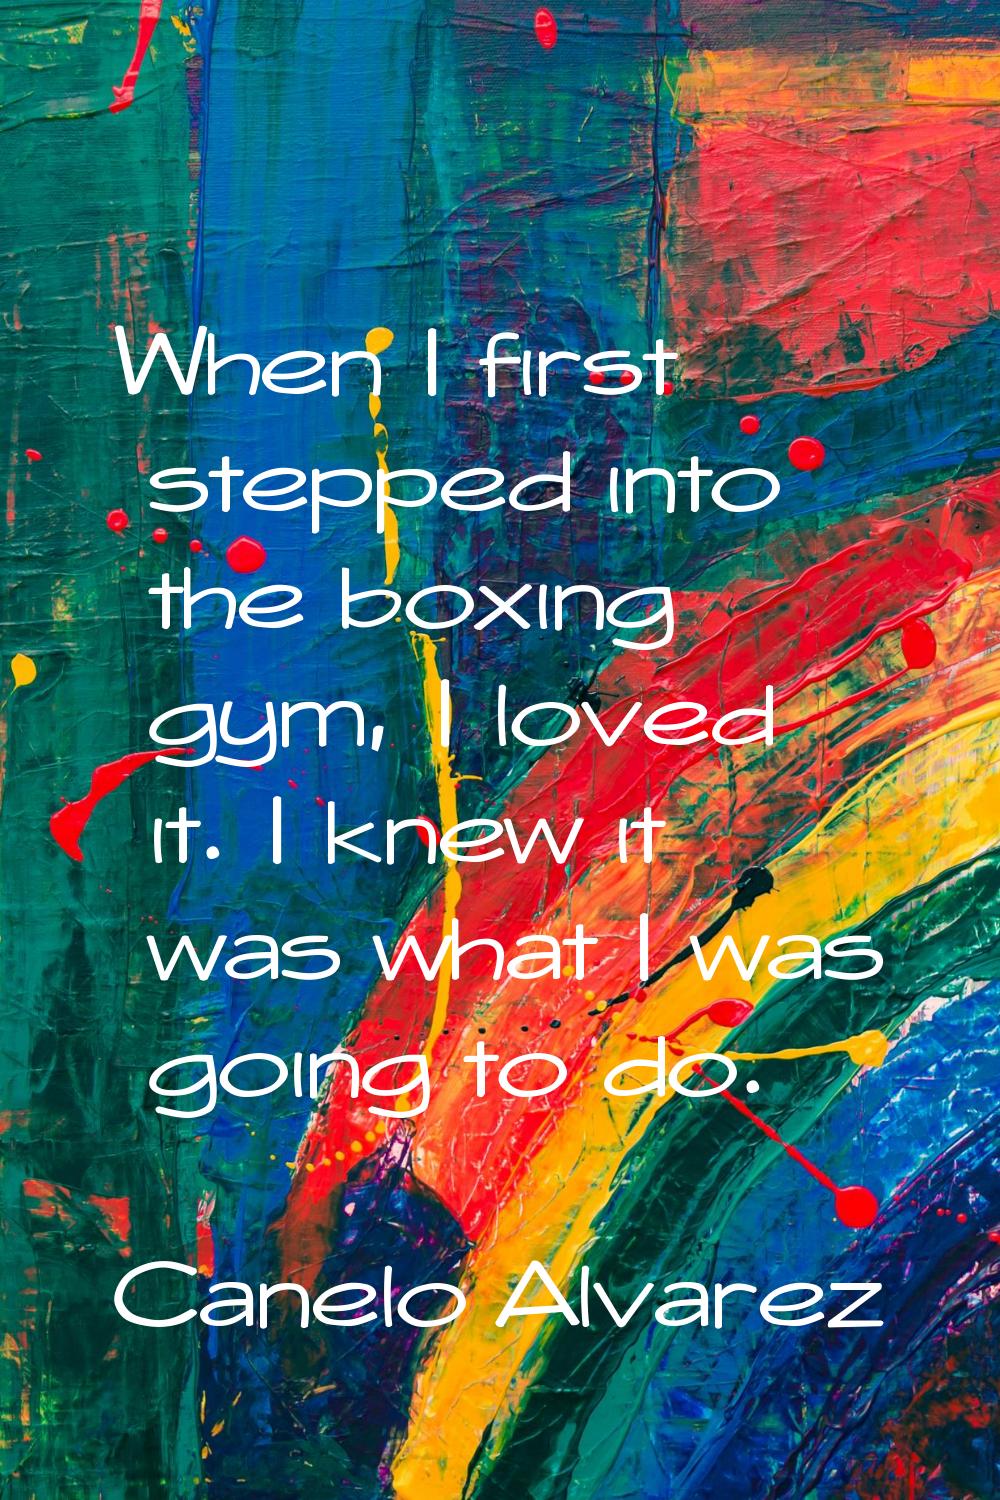 When I first stepped into the boxing gym, I loved it. I knew it was what I was going to do.